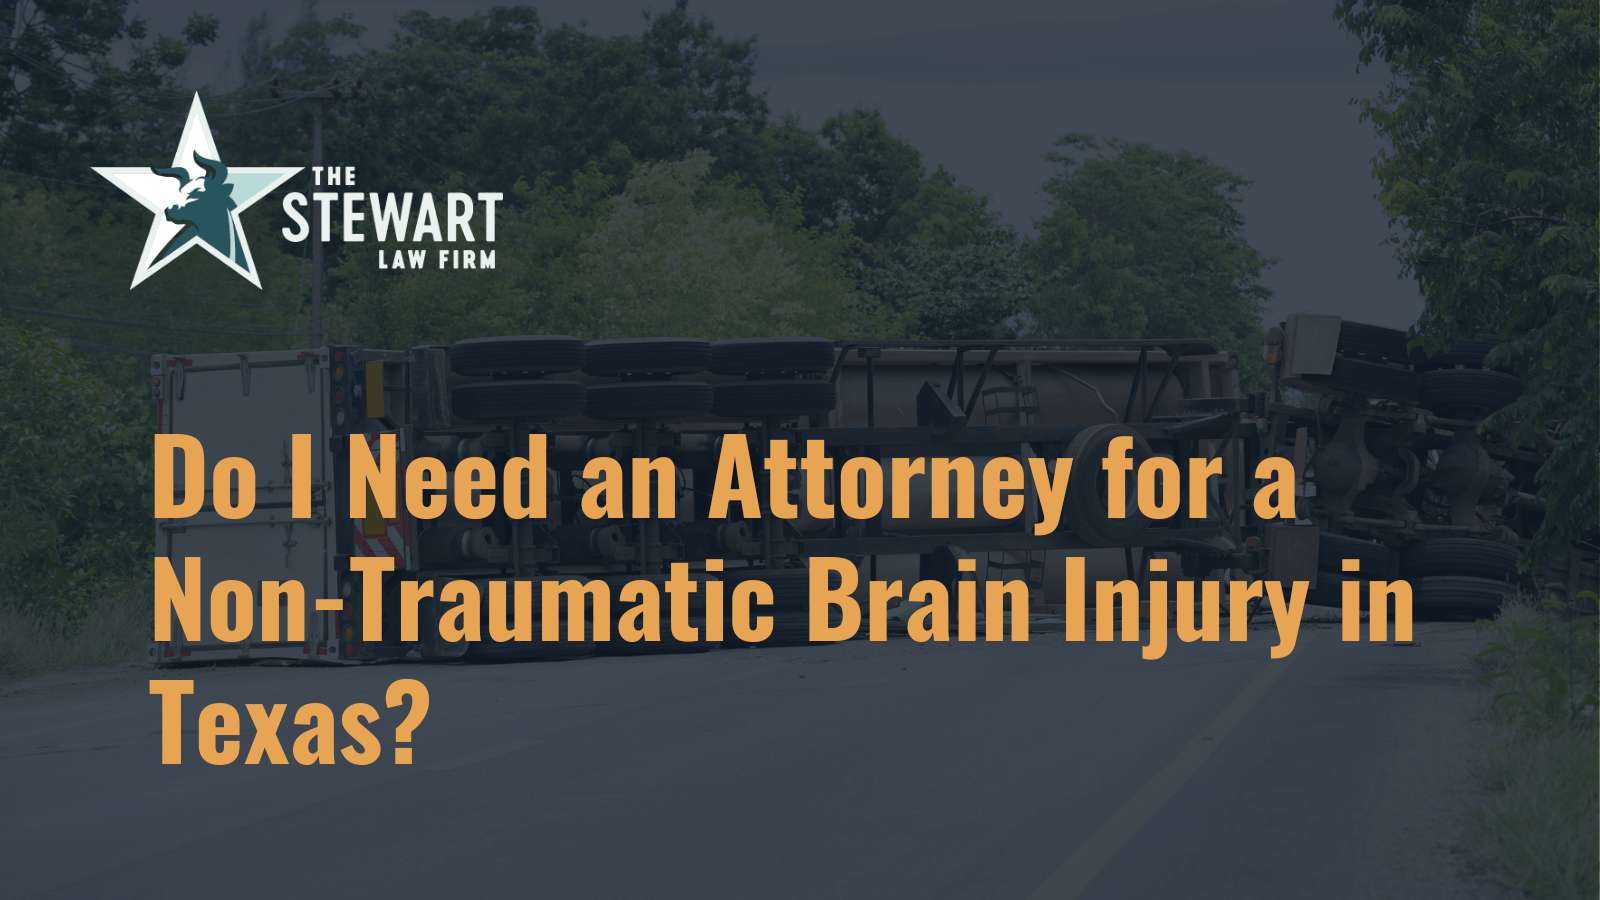 Do I Need an Attorney for a Non-Traumatic Brain Injury in Texas? - the stewart law firm - austin texas personal injury lawyer